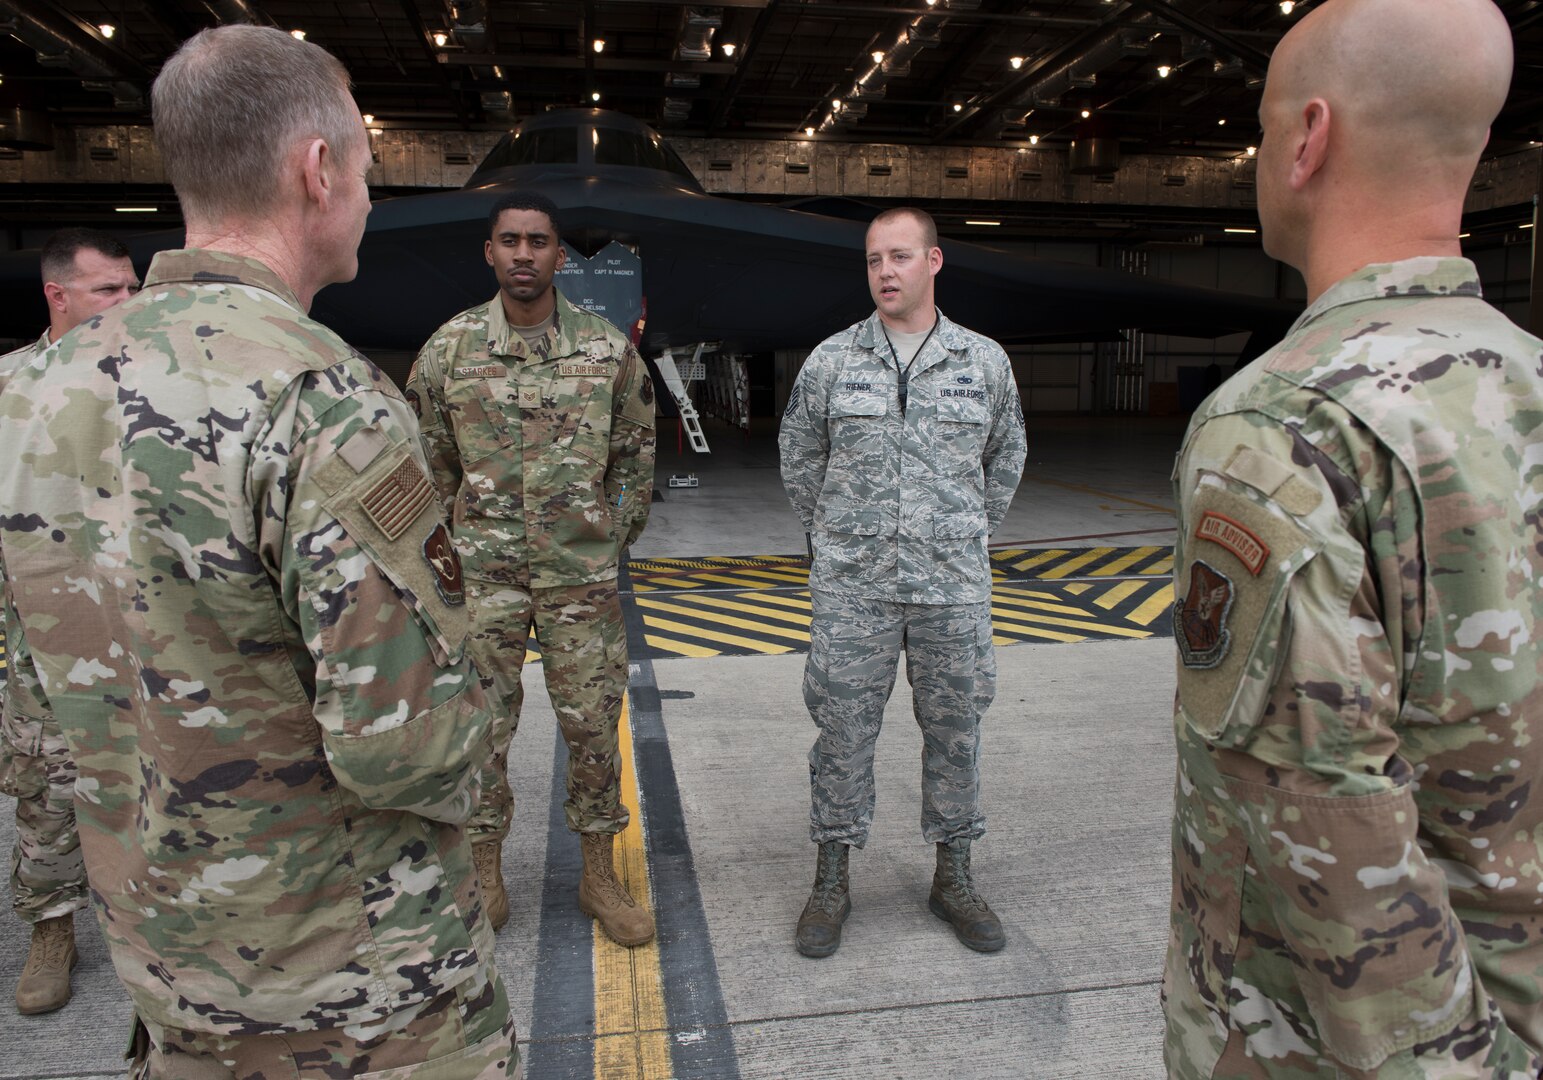 Technical Sergeant Erik Reiner, an aerospace ground equipment member assigned to the 509th Aircraft Maintenance Squadron at Whiteman Air Force Base, Missouri, talks to Major General James Dawkins Jr., the Eighth Air Force commander, on August 27, 2019, at Royal Air Force Base Fairford, England. Dawkins coined Reiner for his contributions to Team Whiteman's mission. Members of Team Whiteman, along with along strategic partners have deployed as part of a Bomber Task Force to the European Command area of operations to conduct theater integration and flying training. (U.S. Air Force photo by Staff Sgt. Kayla White)